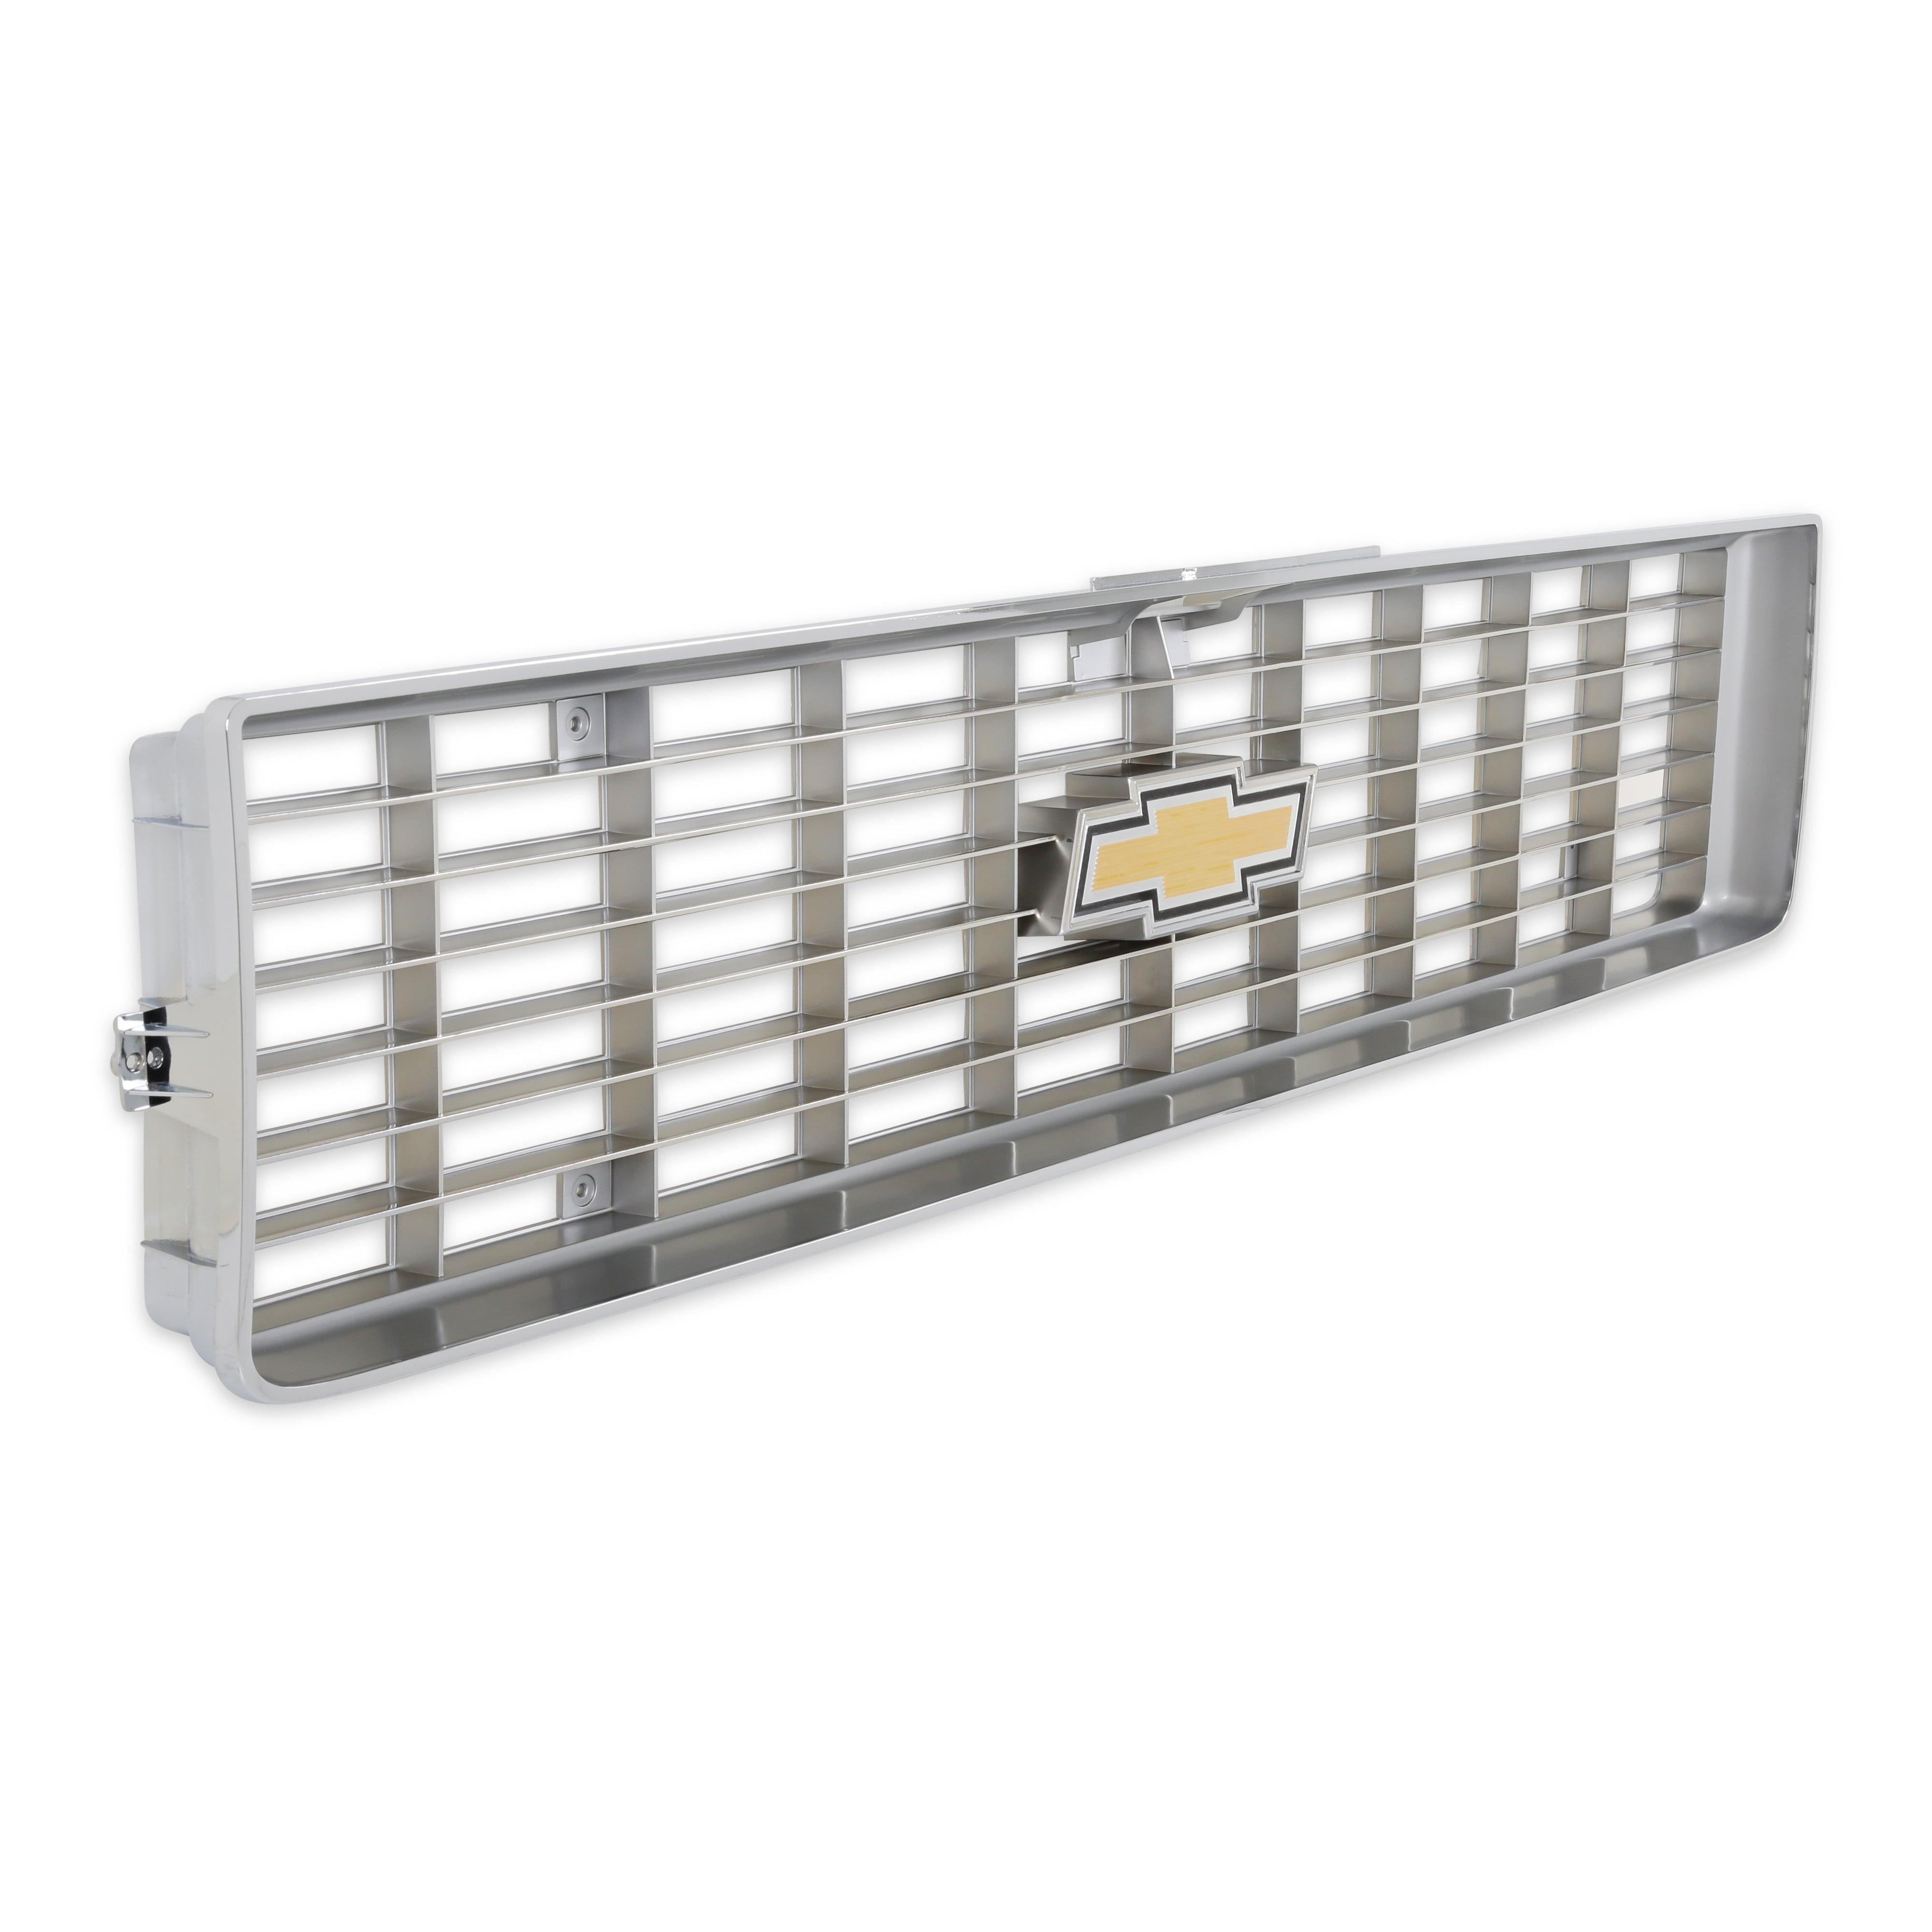 BROTHERS C/K Chevy Grille - w/ Bowtie - Chrome pn 04-168